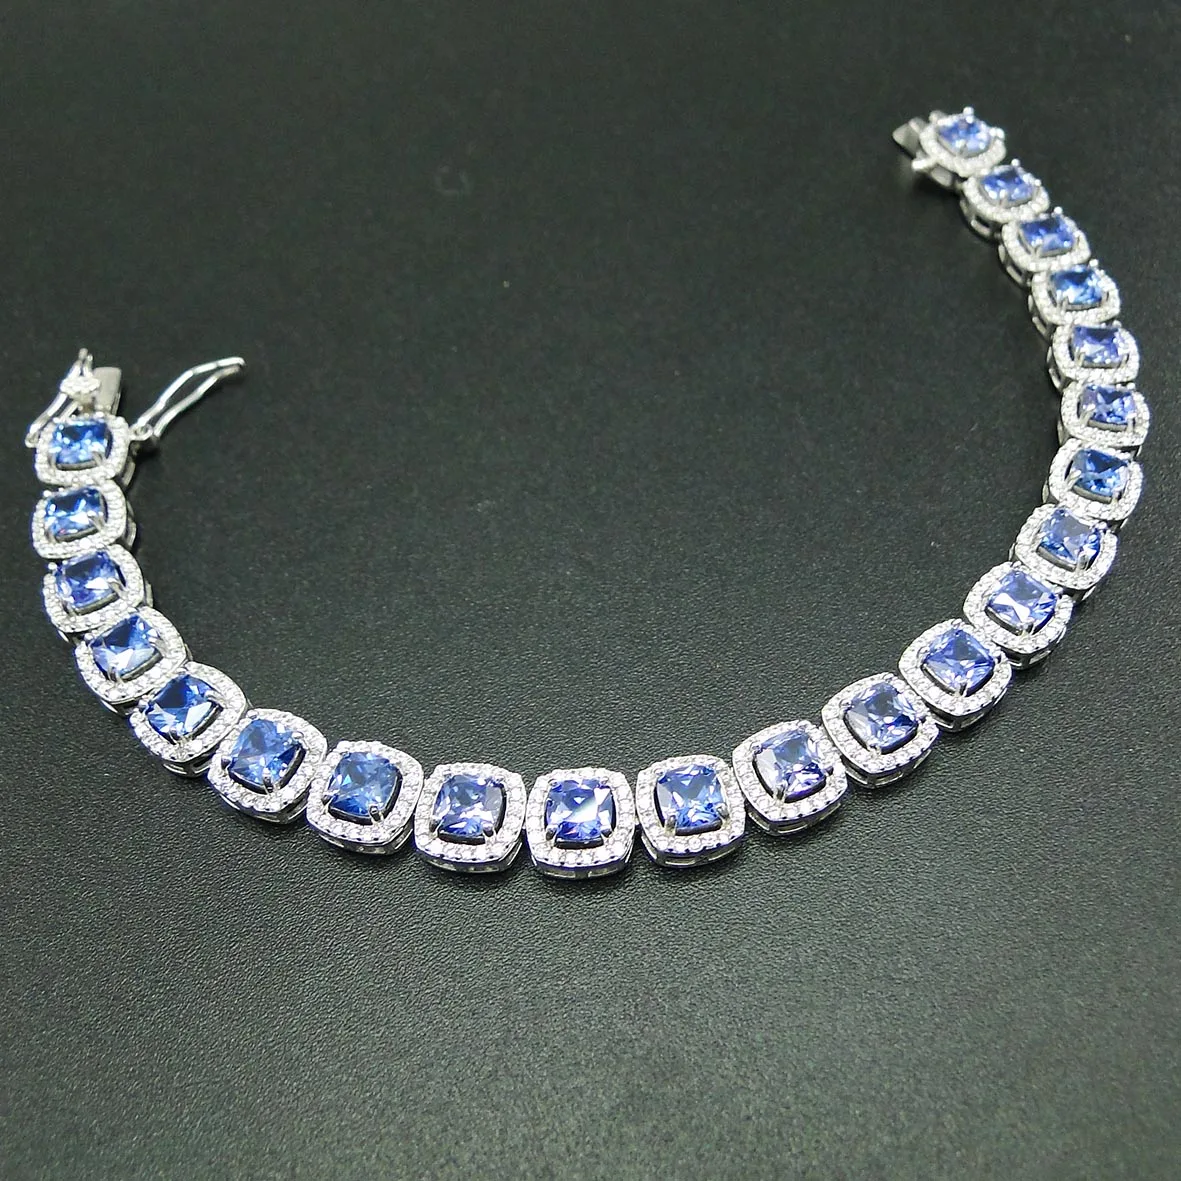 High Quality 100% Real 925 Sterling Silver Bracelet Tanzanite CZ Bracelets for Women Engagement Wedding Jewelry Gift